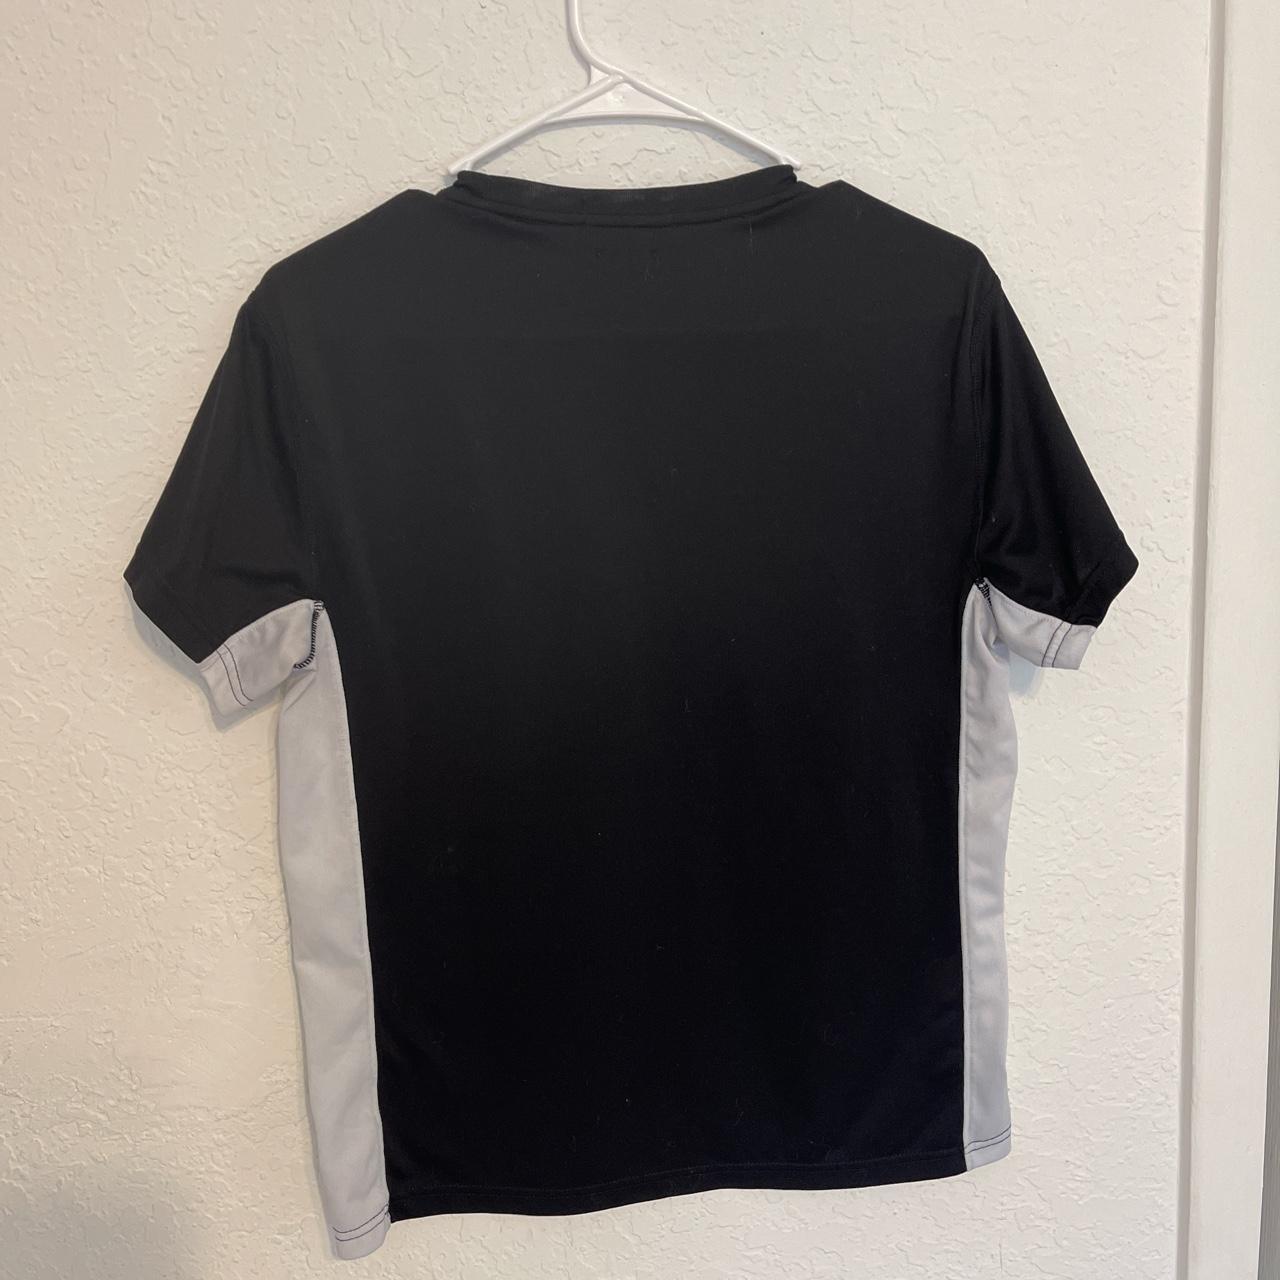 Black and White Polo Tee - Depop